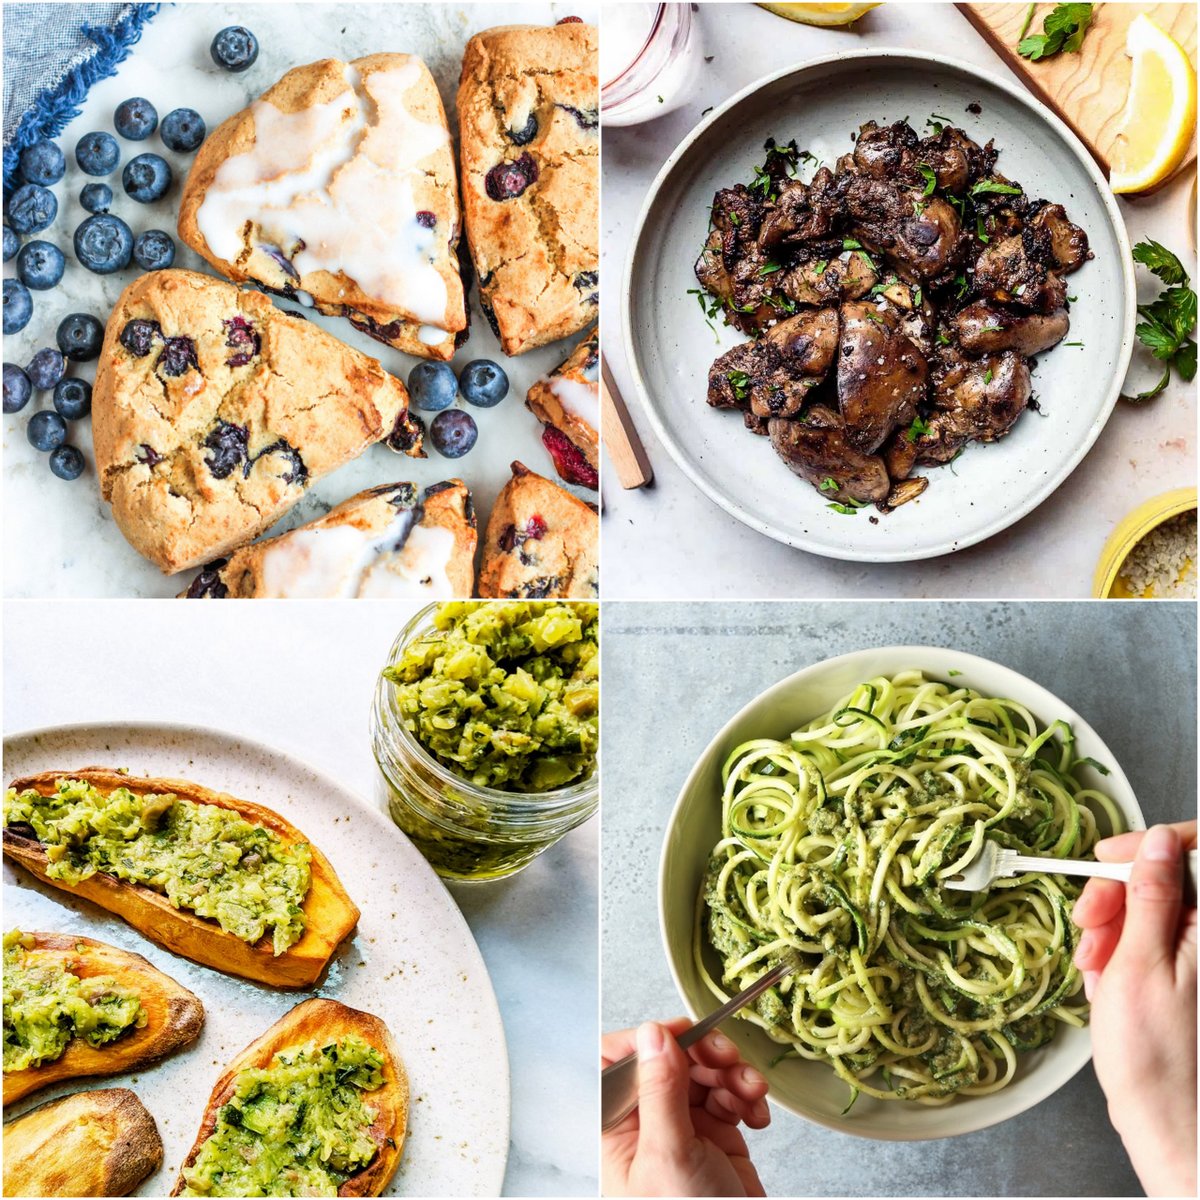 Paleo AIP Recipe Roundtable #379 | Phoenix Helix - *Featured Recipes: Blueberry Scones, Chilled Zucchini Pasta Salad, Zucchini Olive Tapenade, and Lemon Garlic Chicken Livers and Onions.